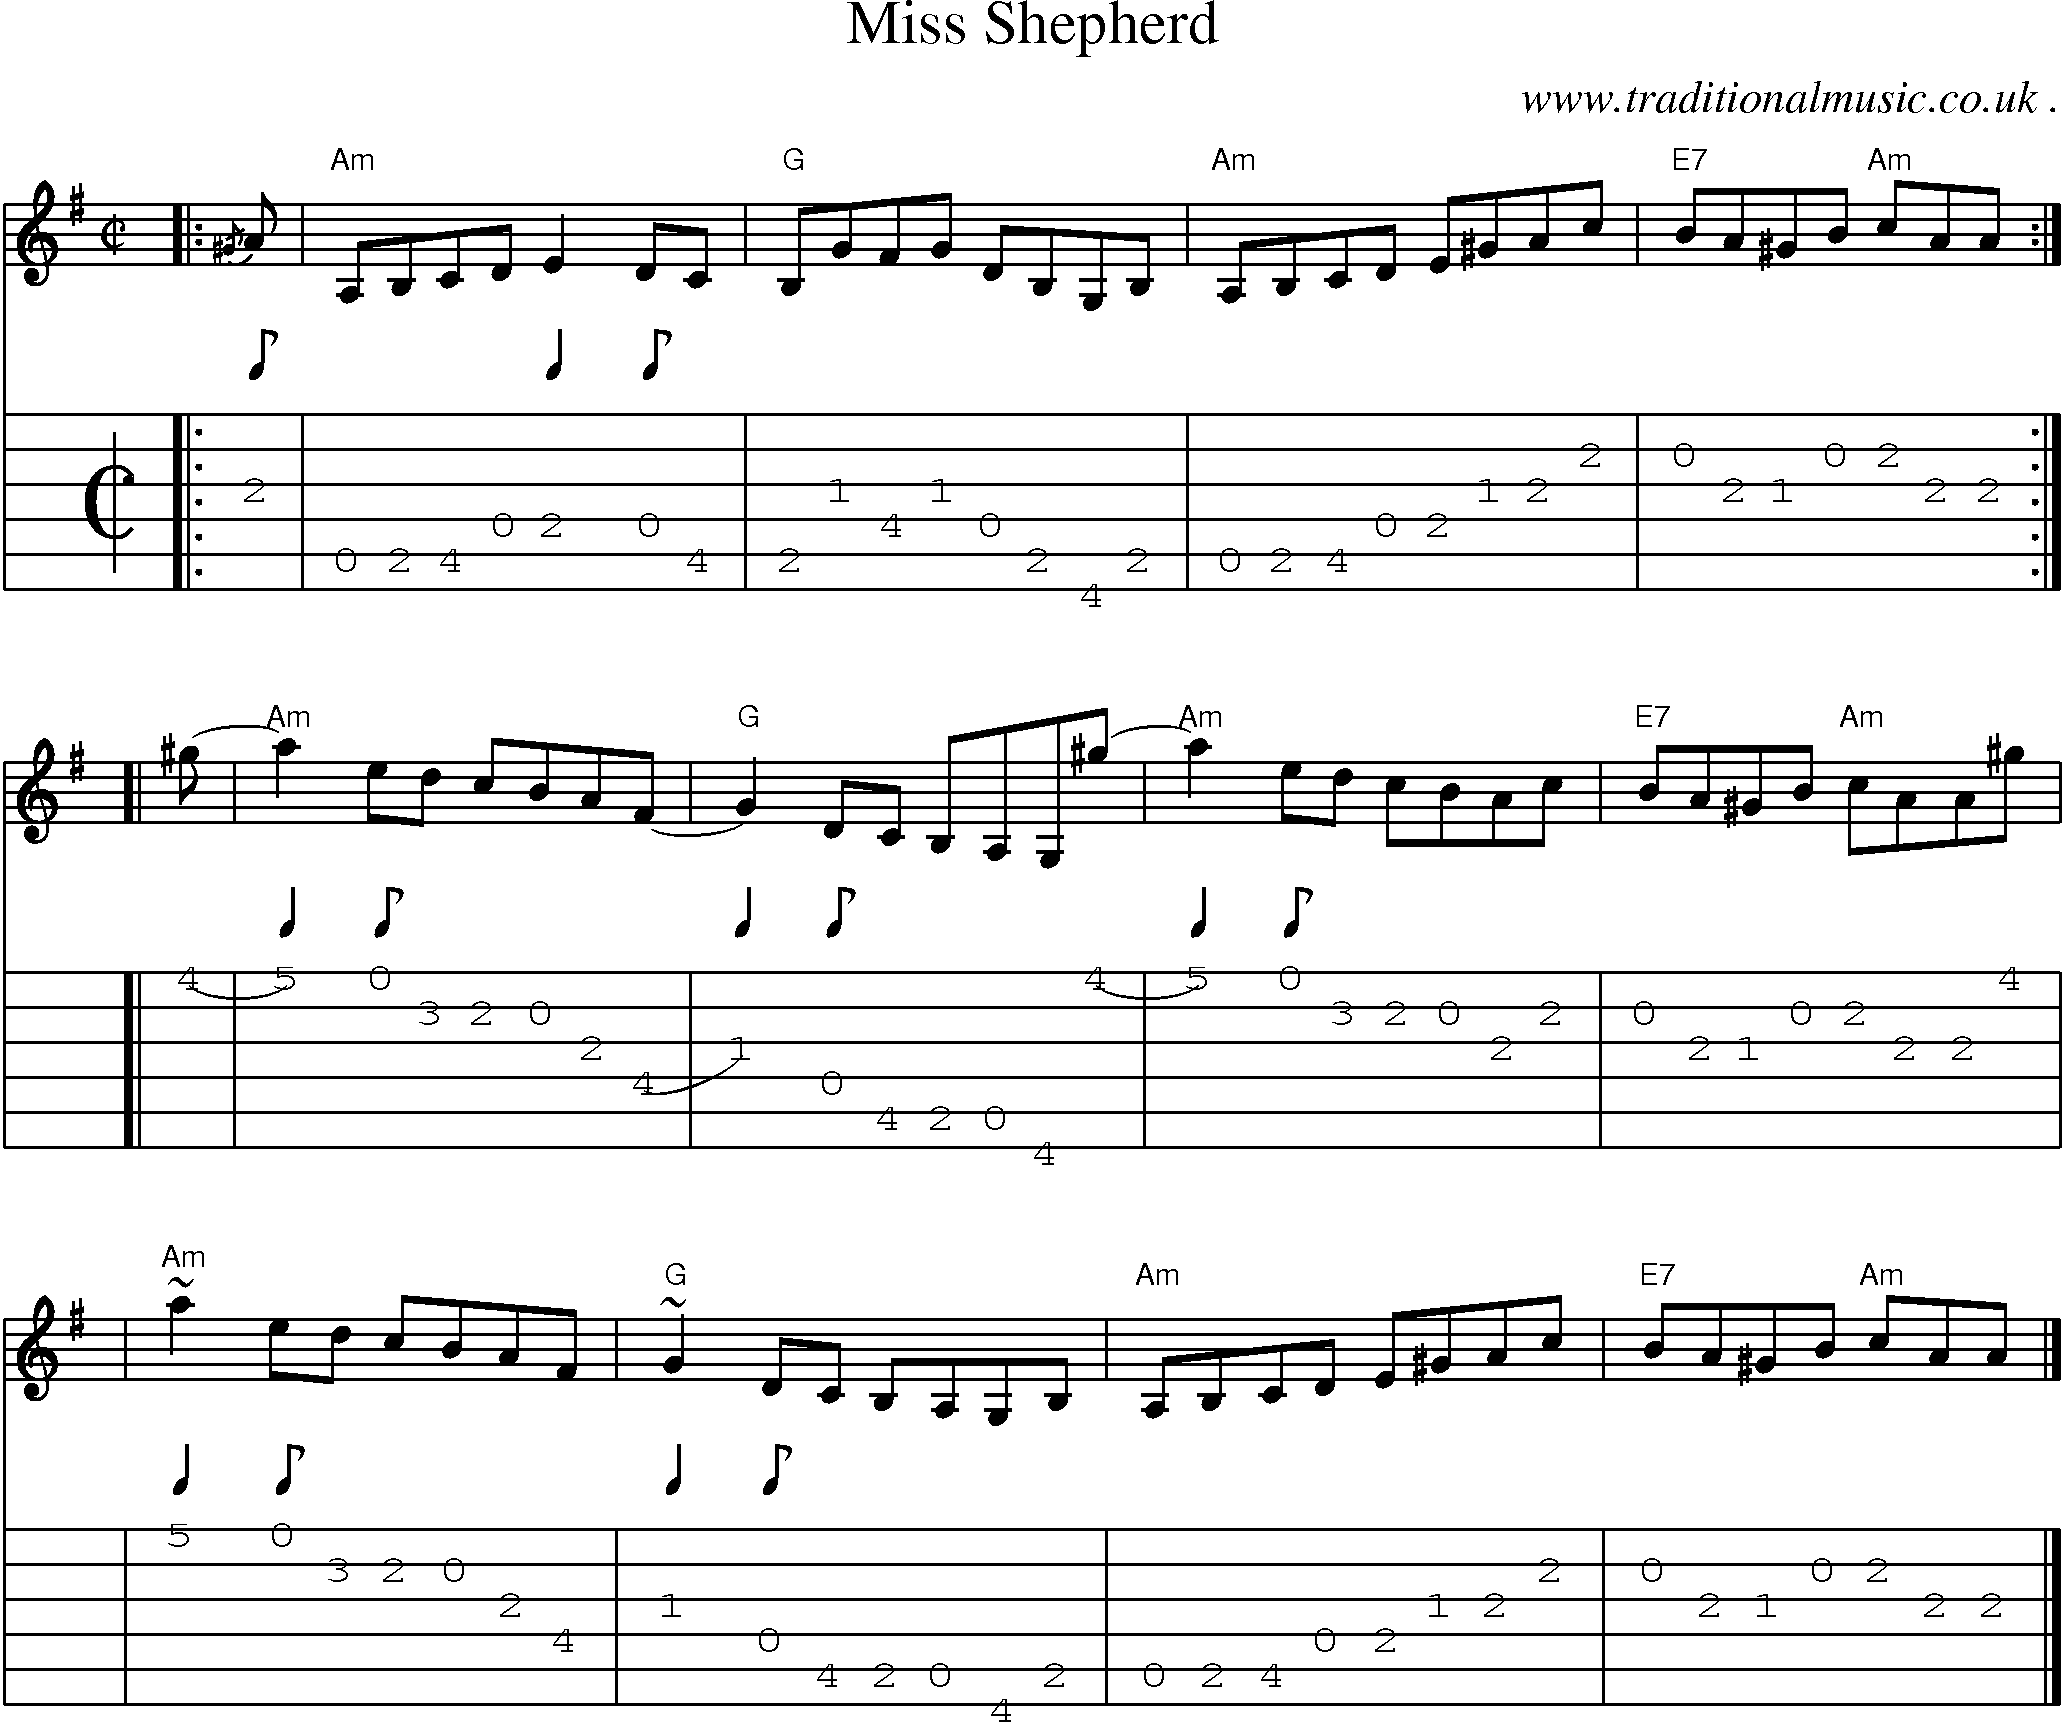 Sheet-music  score, Chords and Guitar Tabs for Miss Shepherd